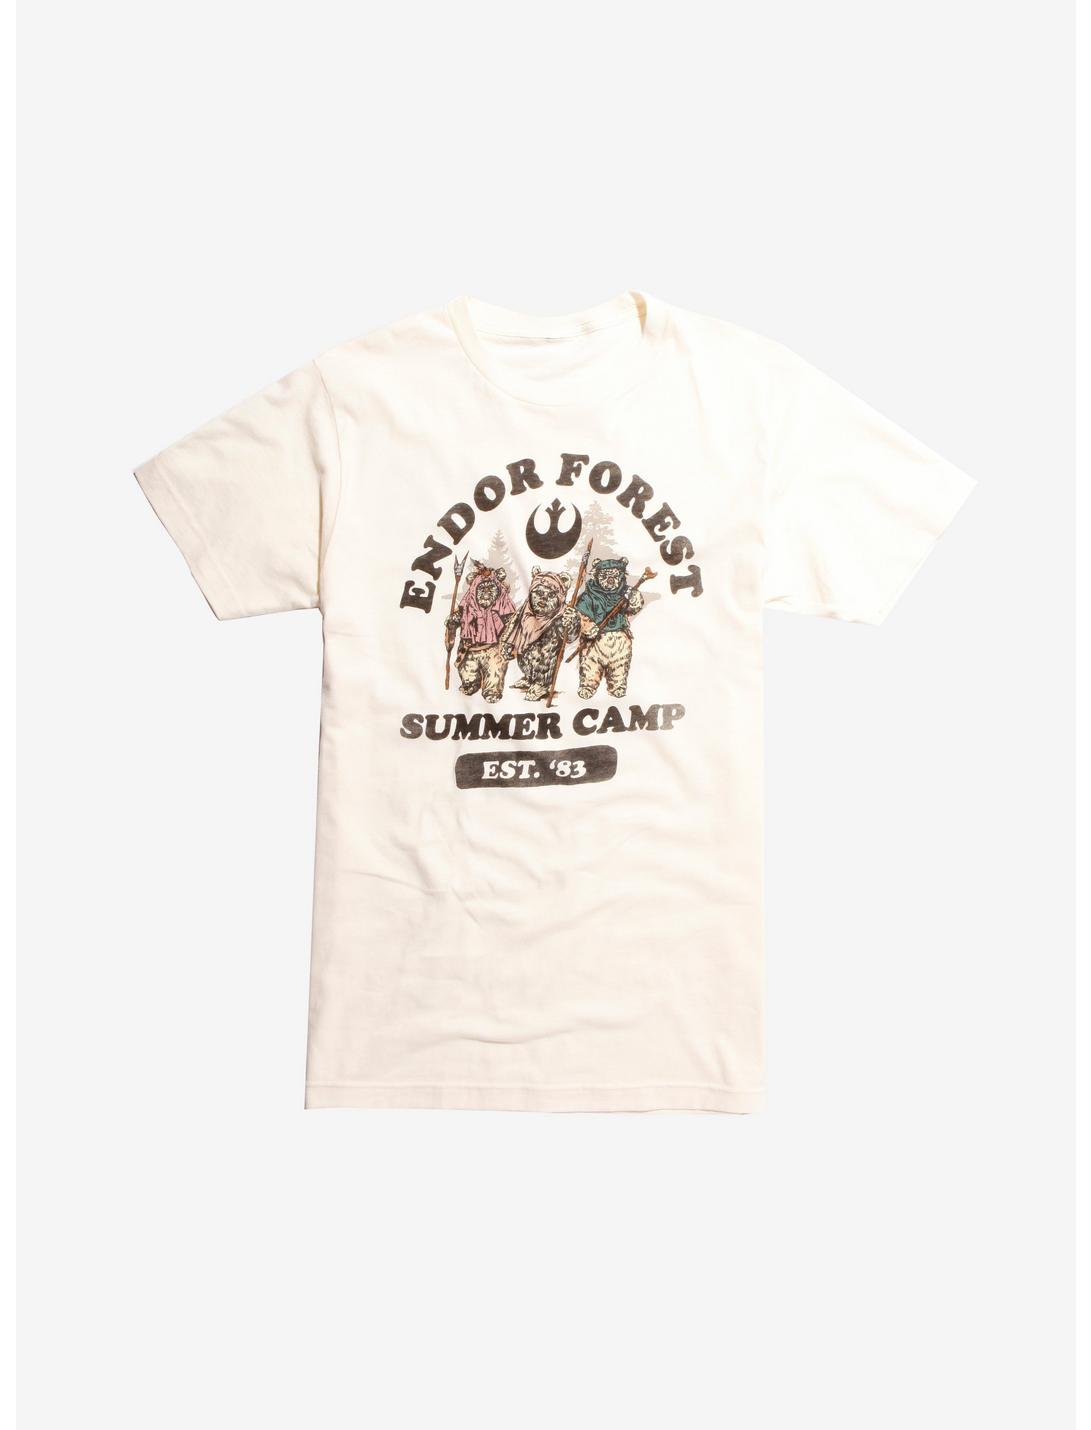 Star Wars Endor Forest Summer Camp T-Shirt Hot Topic Exclusive | Hot Topic